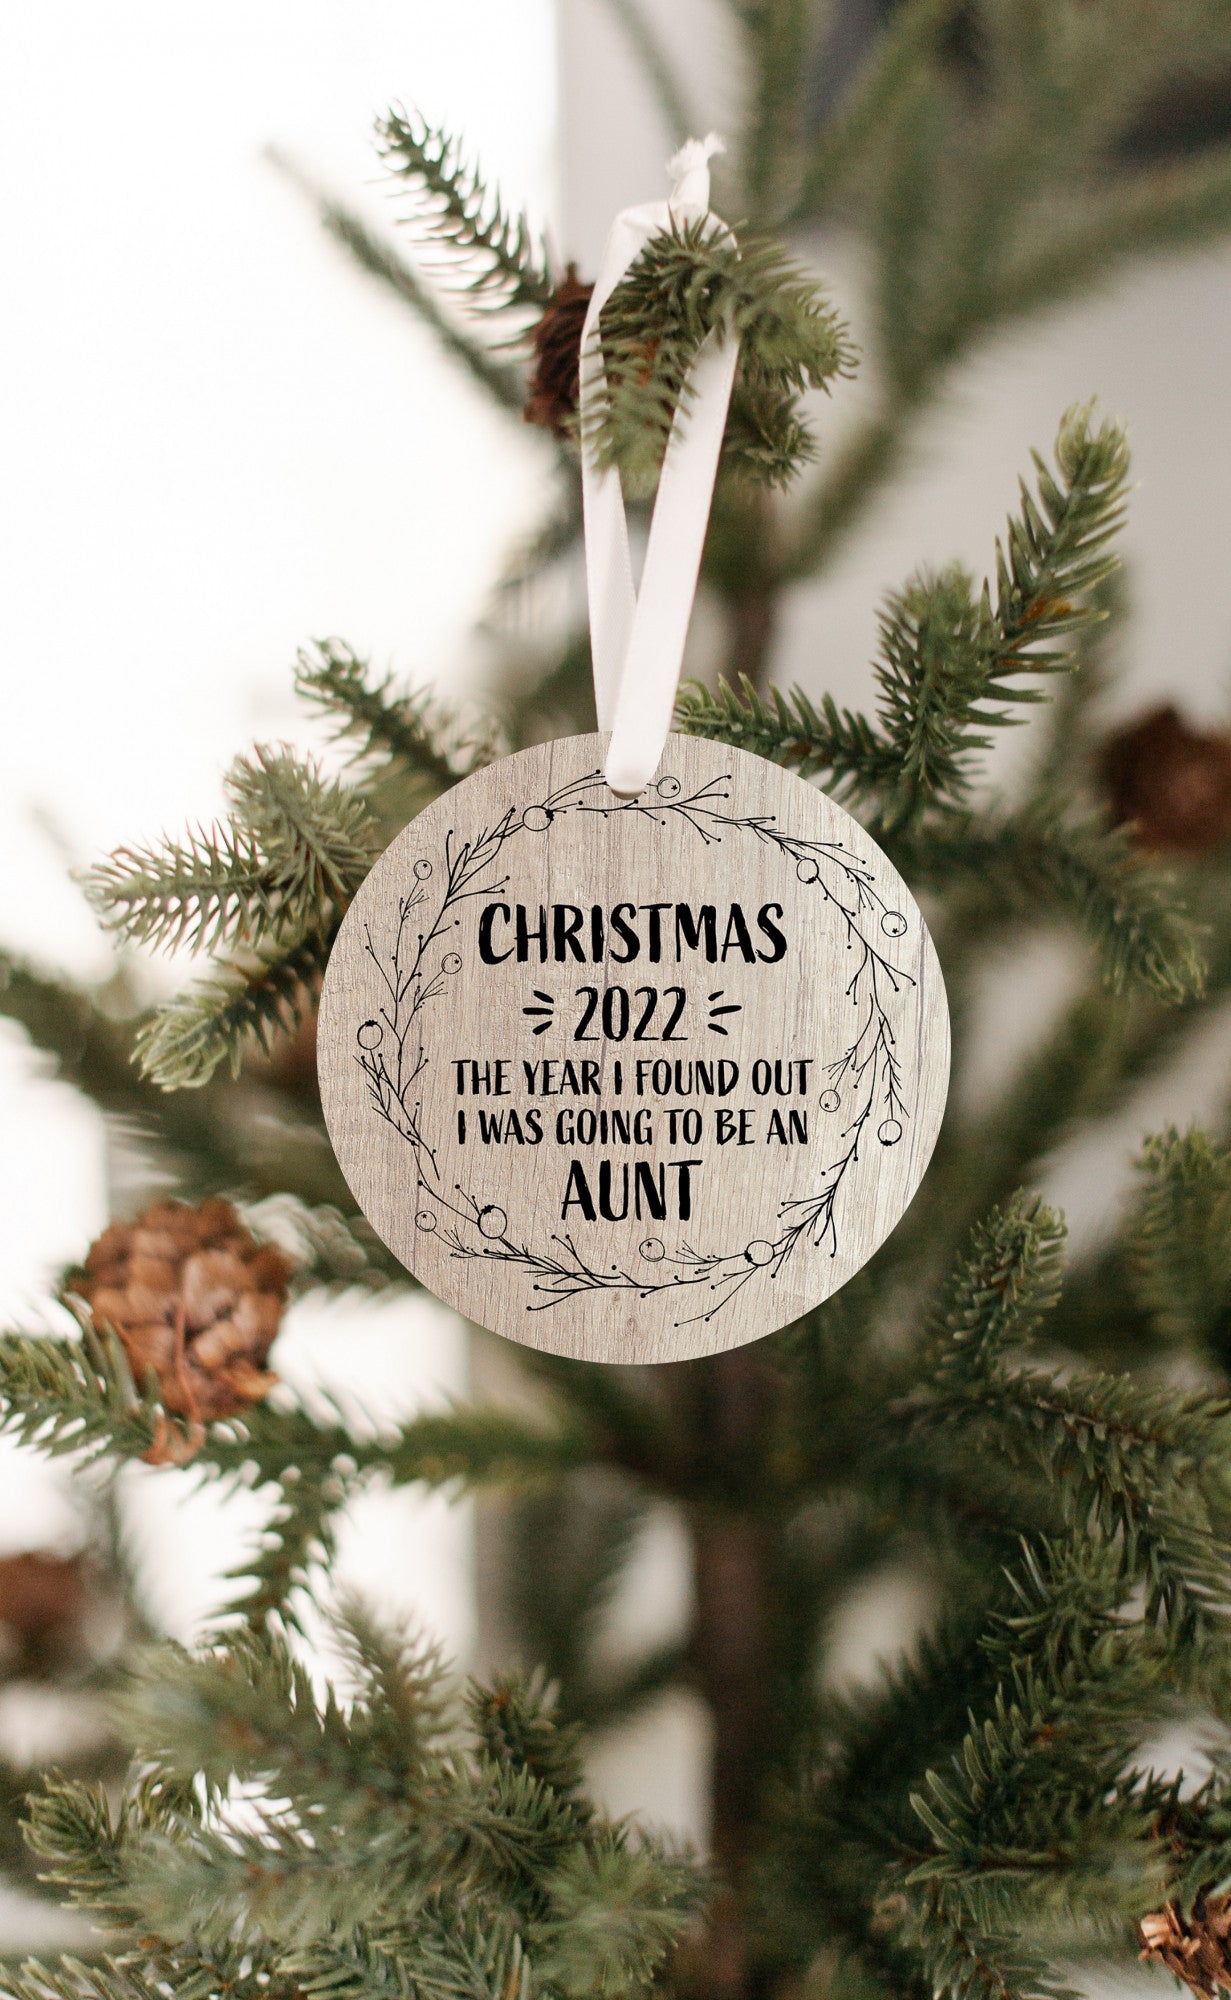 Christmas 2022 The Year I Found Out I was Going To Be An Aunt Ornament